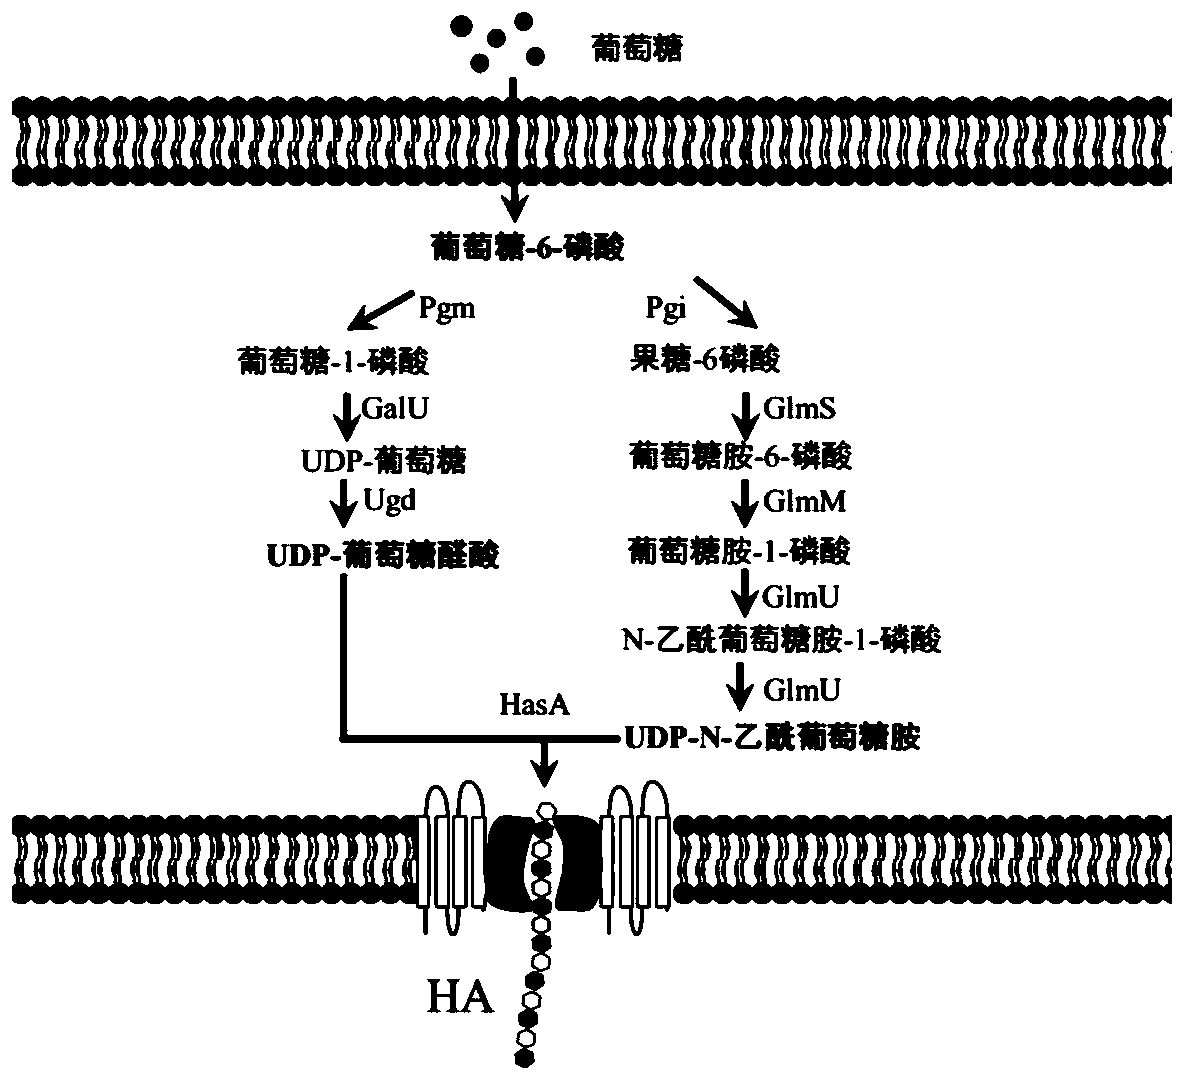 Recombinant corynebacterium glutamicum for efficiently synthesizing high-purity hyaluronic acid and oligosaccharides thereof